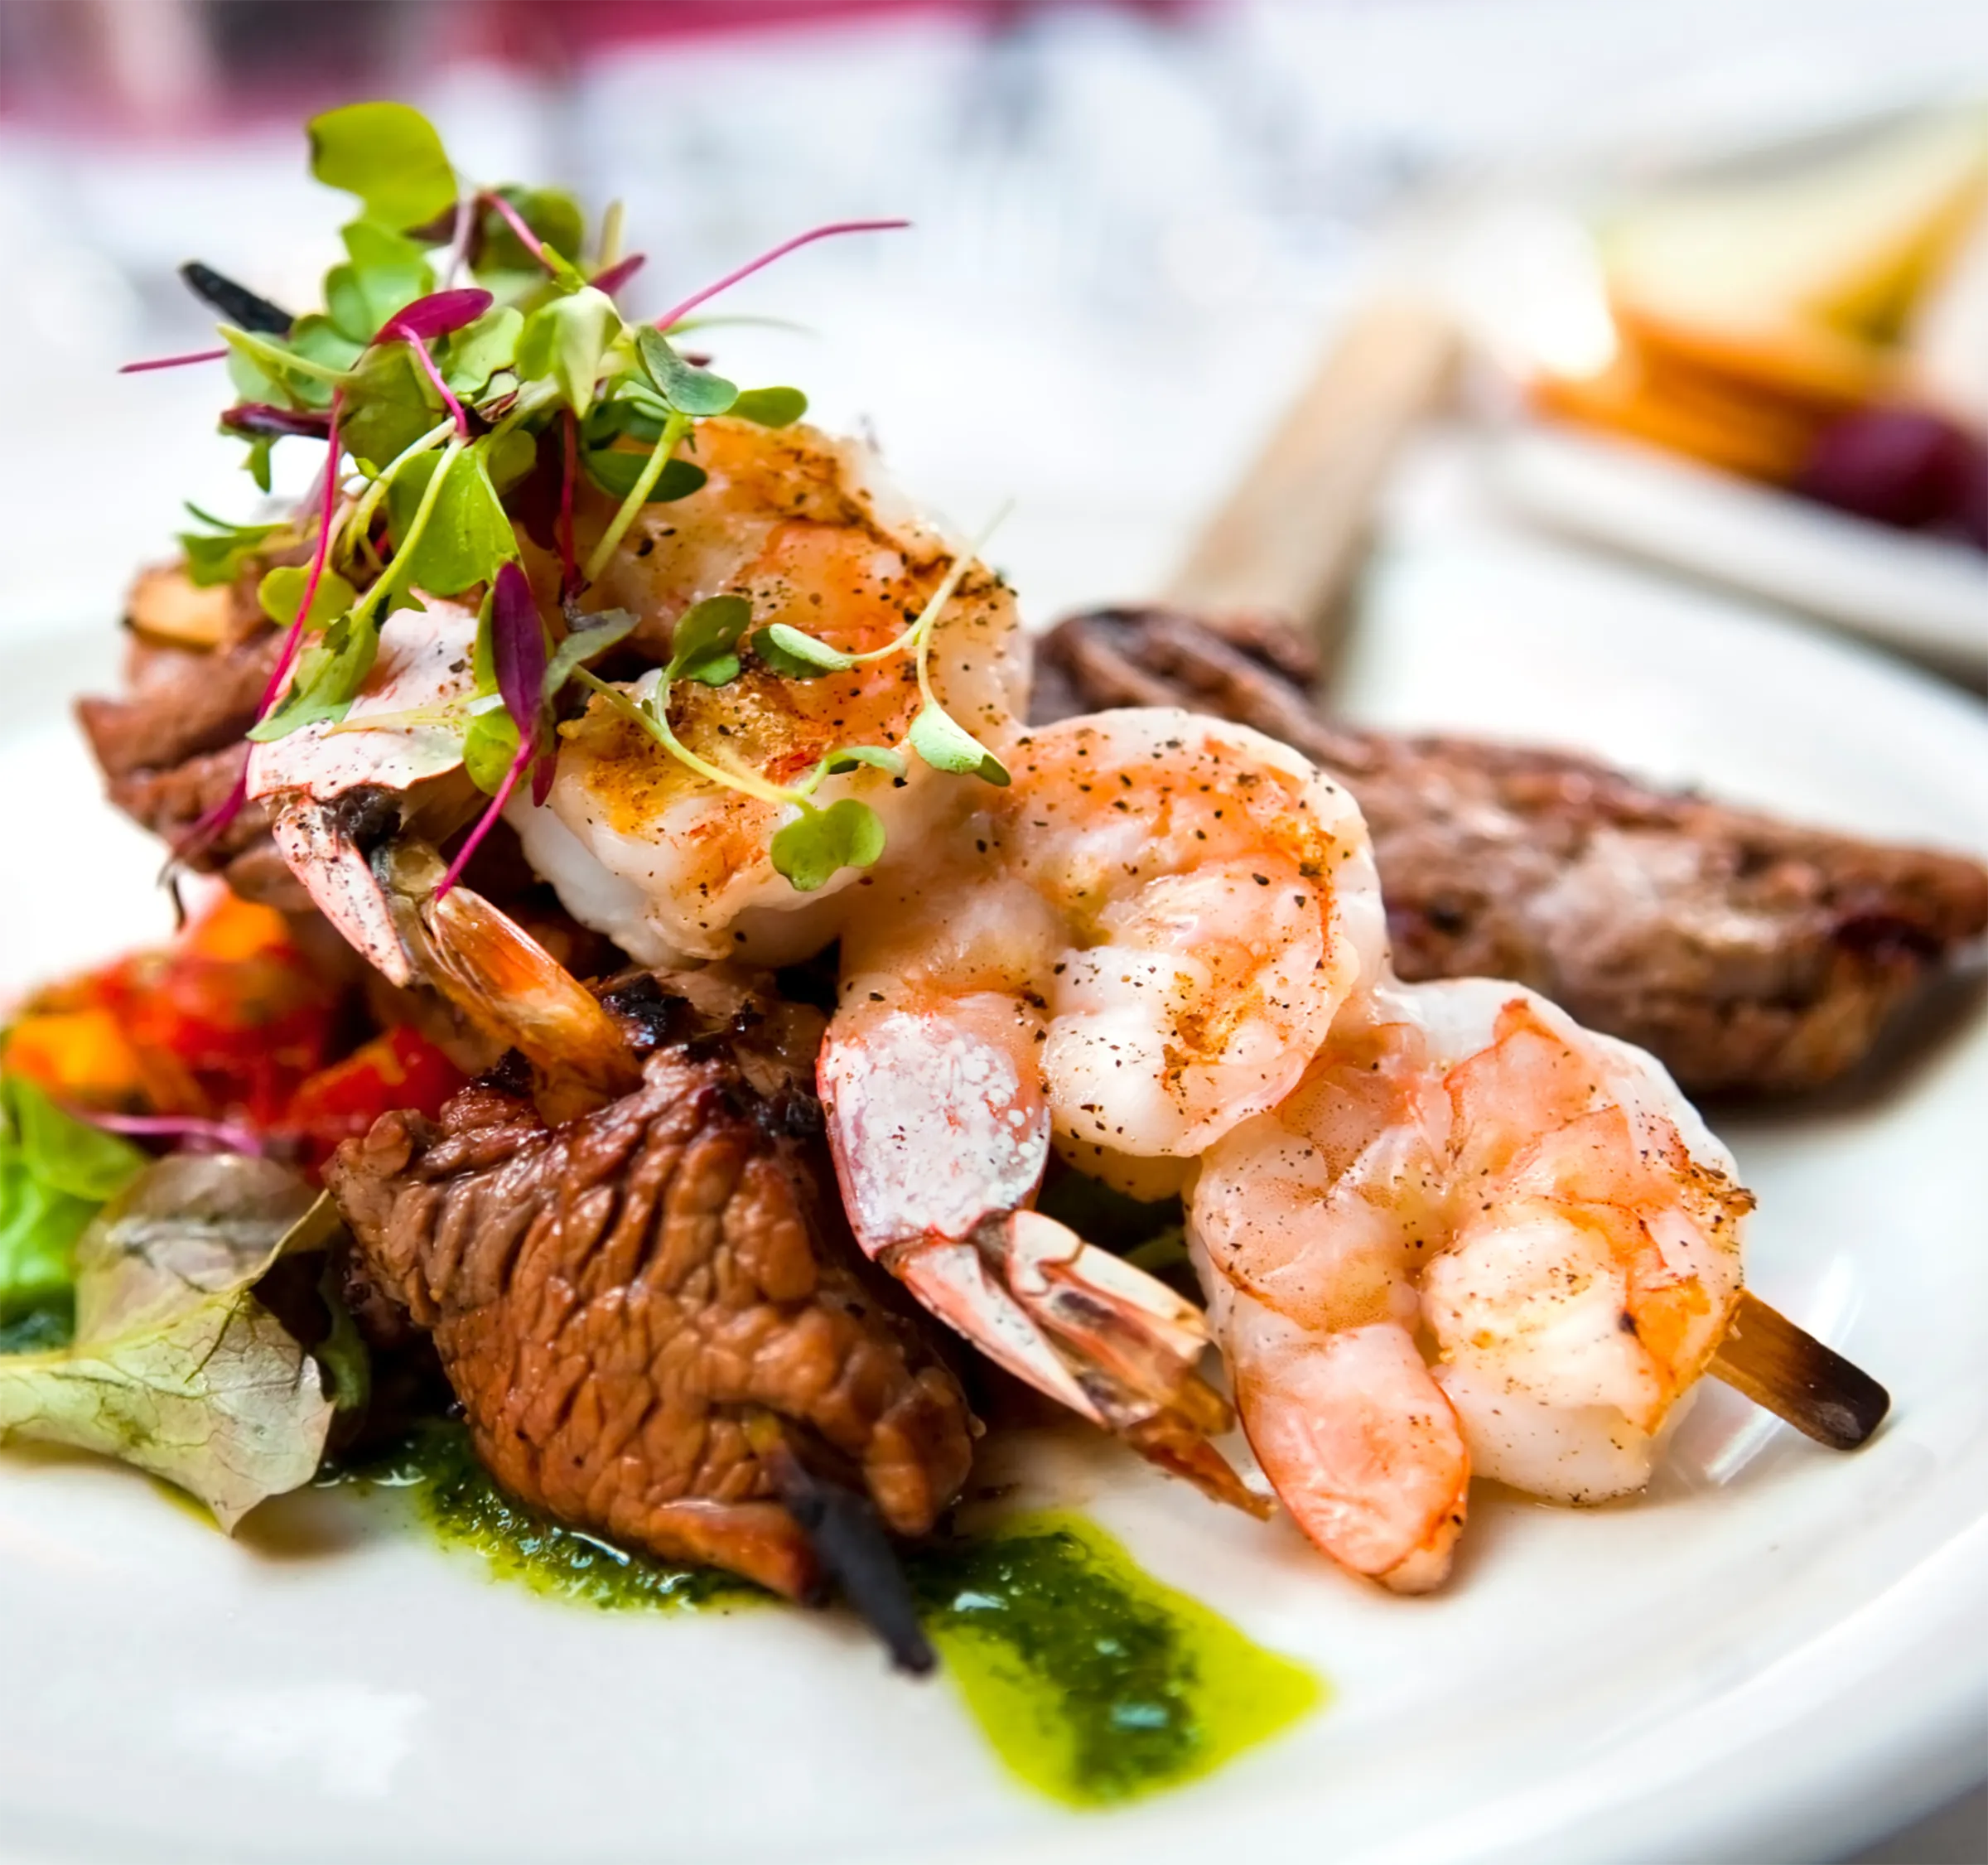 An artfully plated dish of steak and shrimp with microgreens.